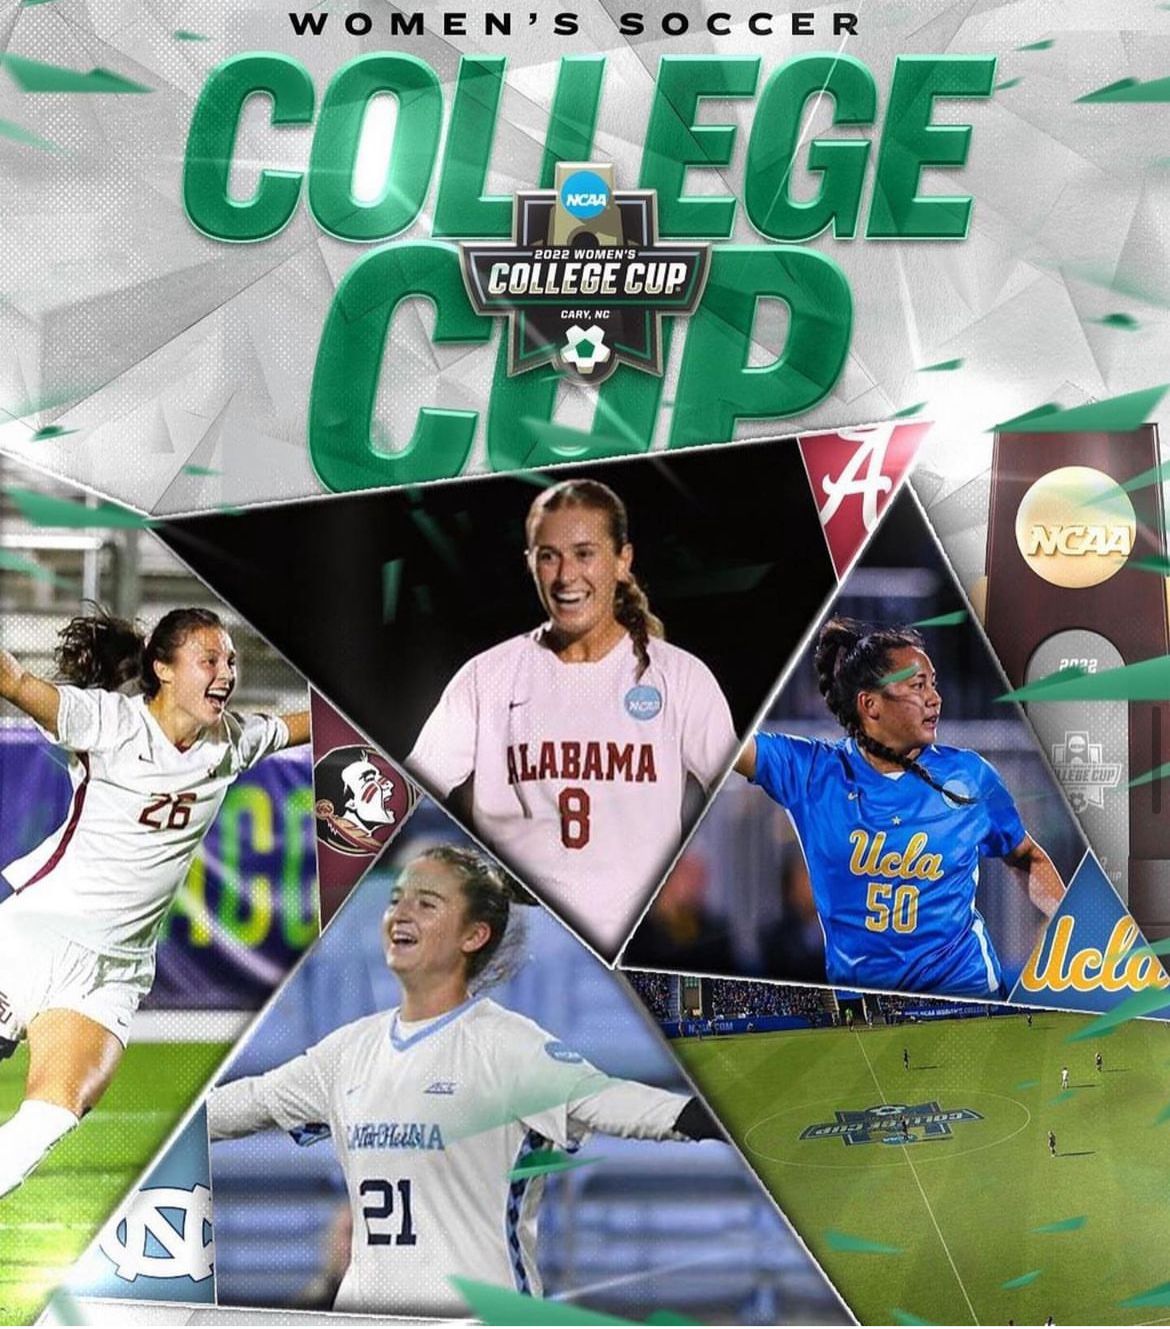 2022 NCAA Division I Women's College Cup Xsport Recruting Company